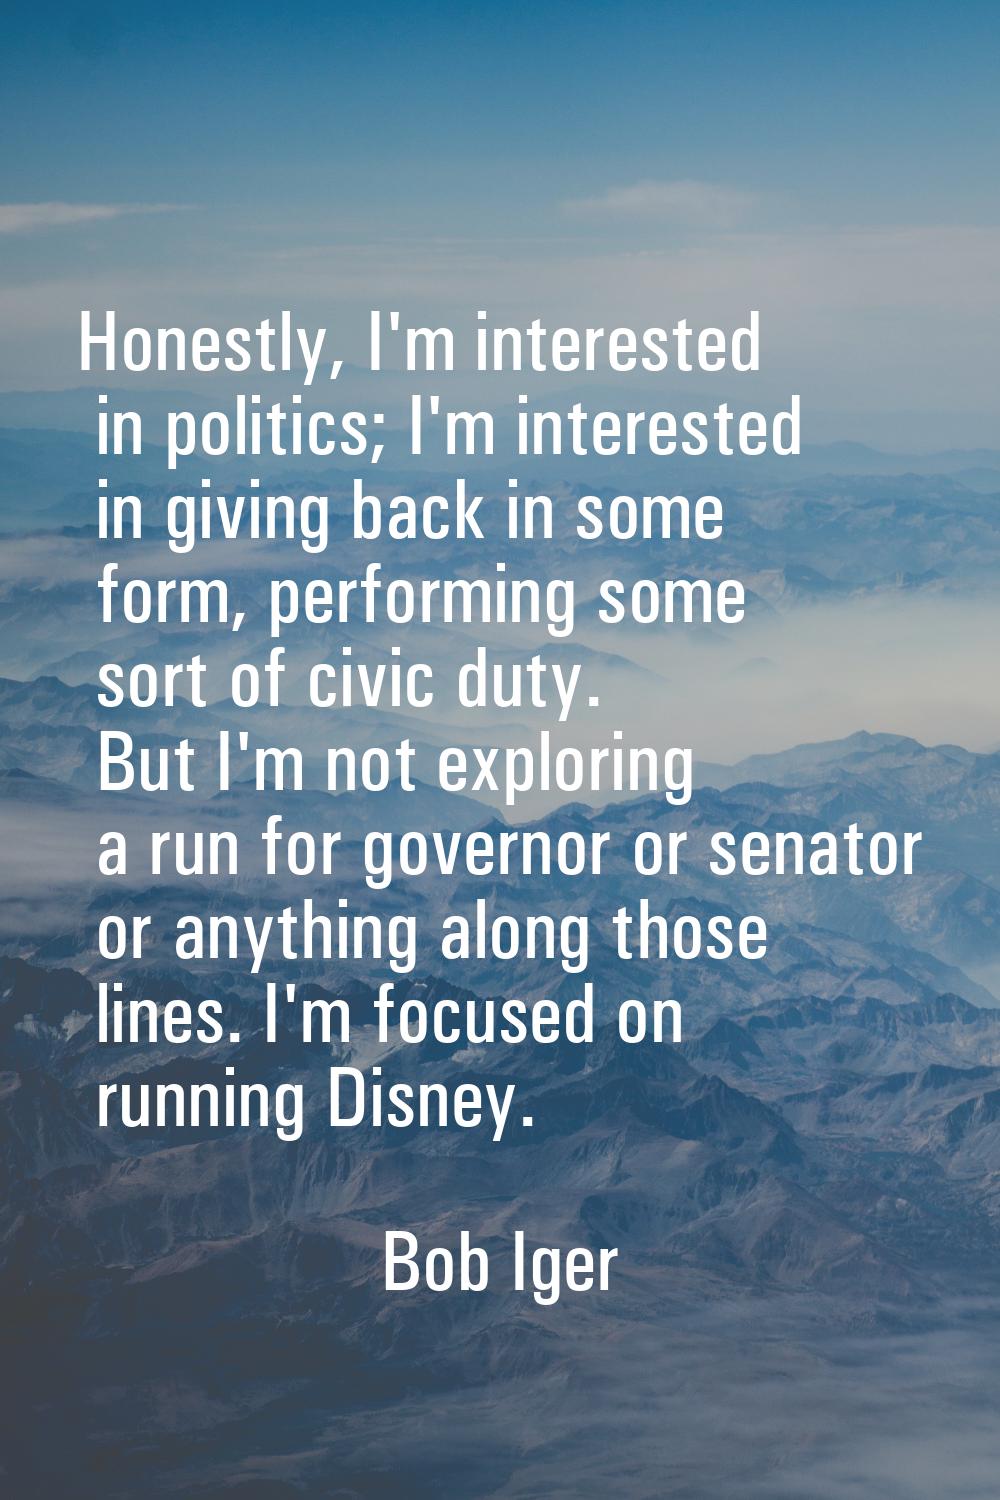 Honestly, I'm interested in politics; I'm interested in giving back in some form, performing some s